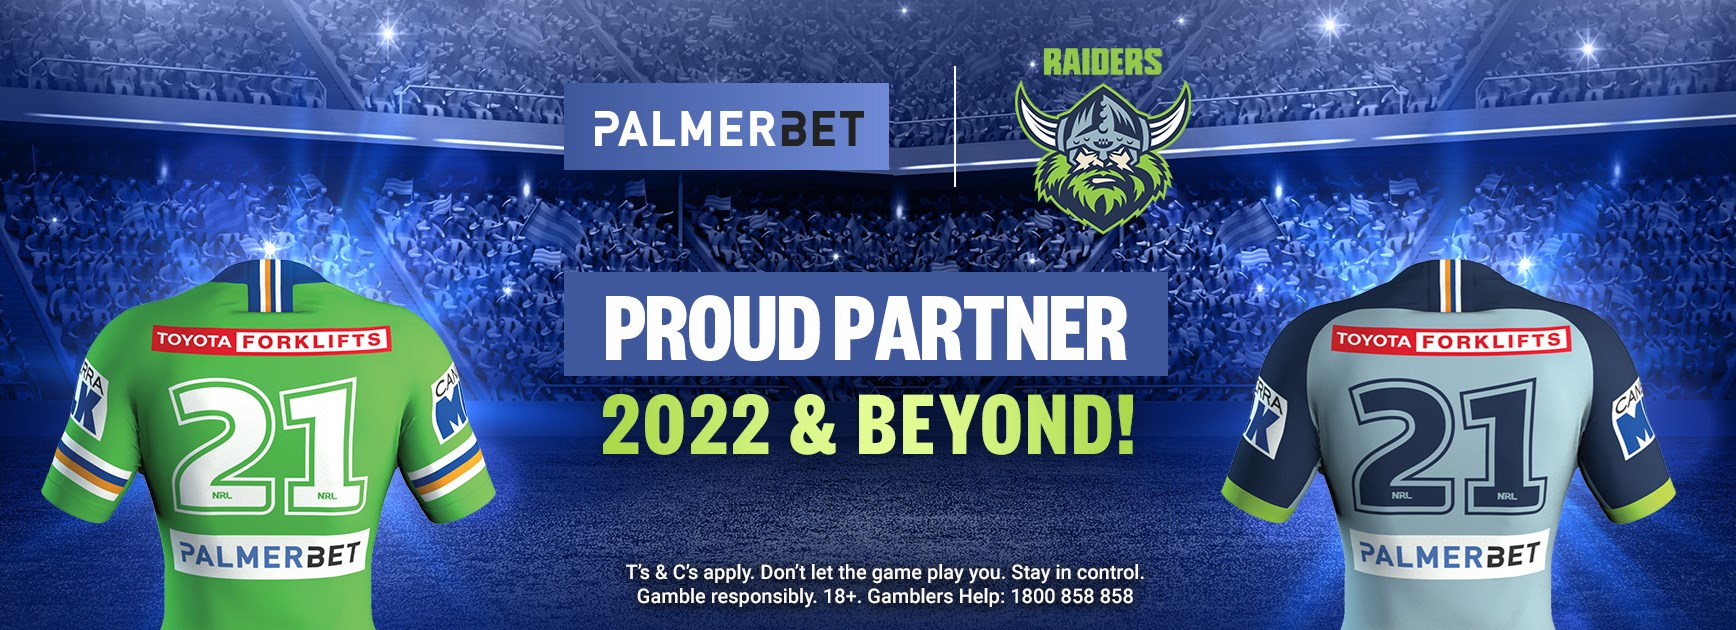 Raiders and Palmerbet together in 2022 and beyond